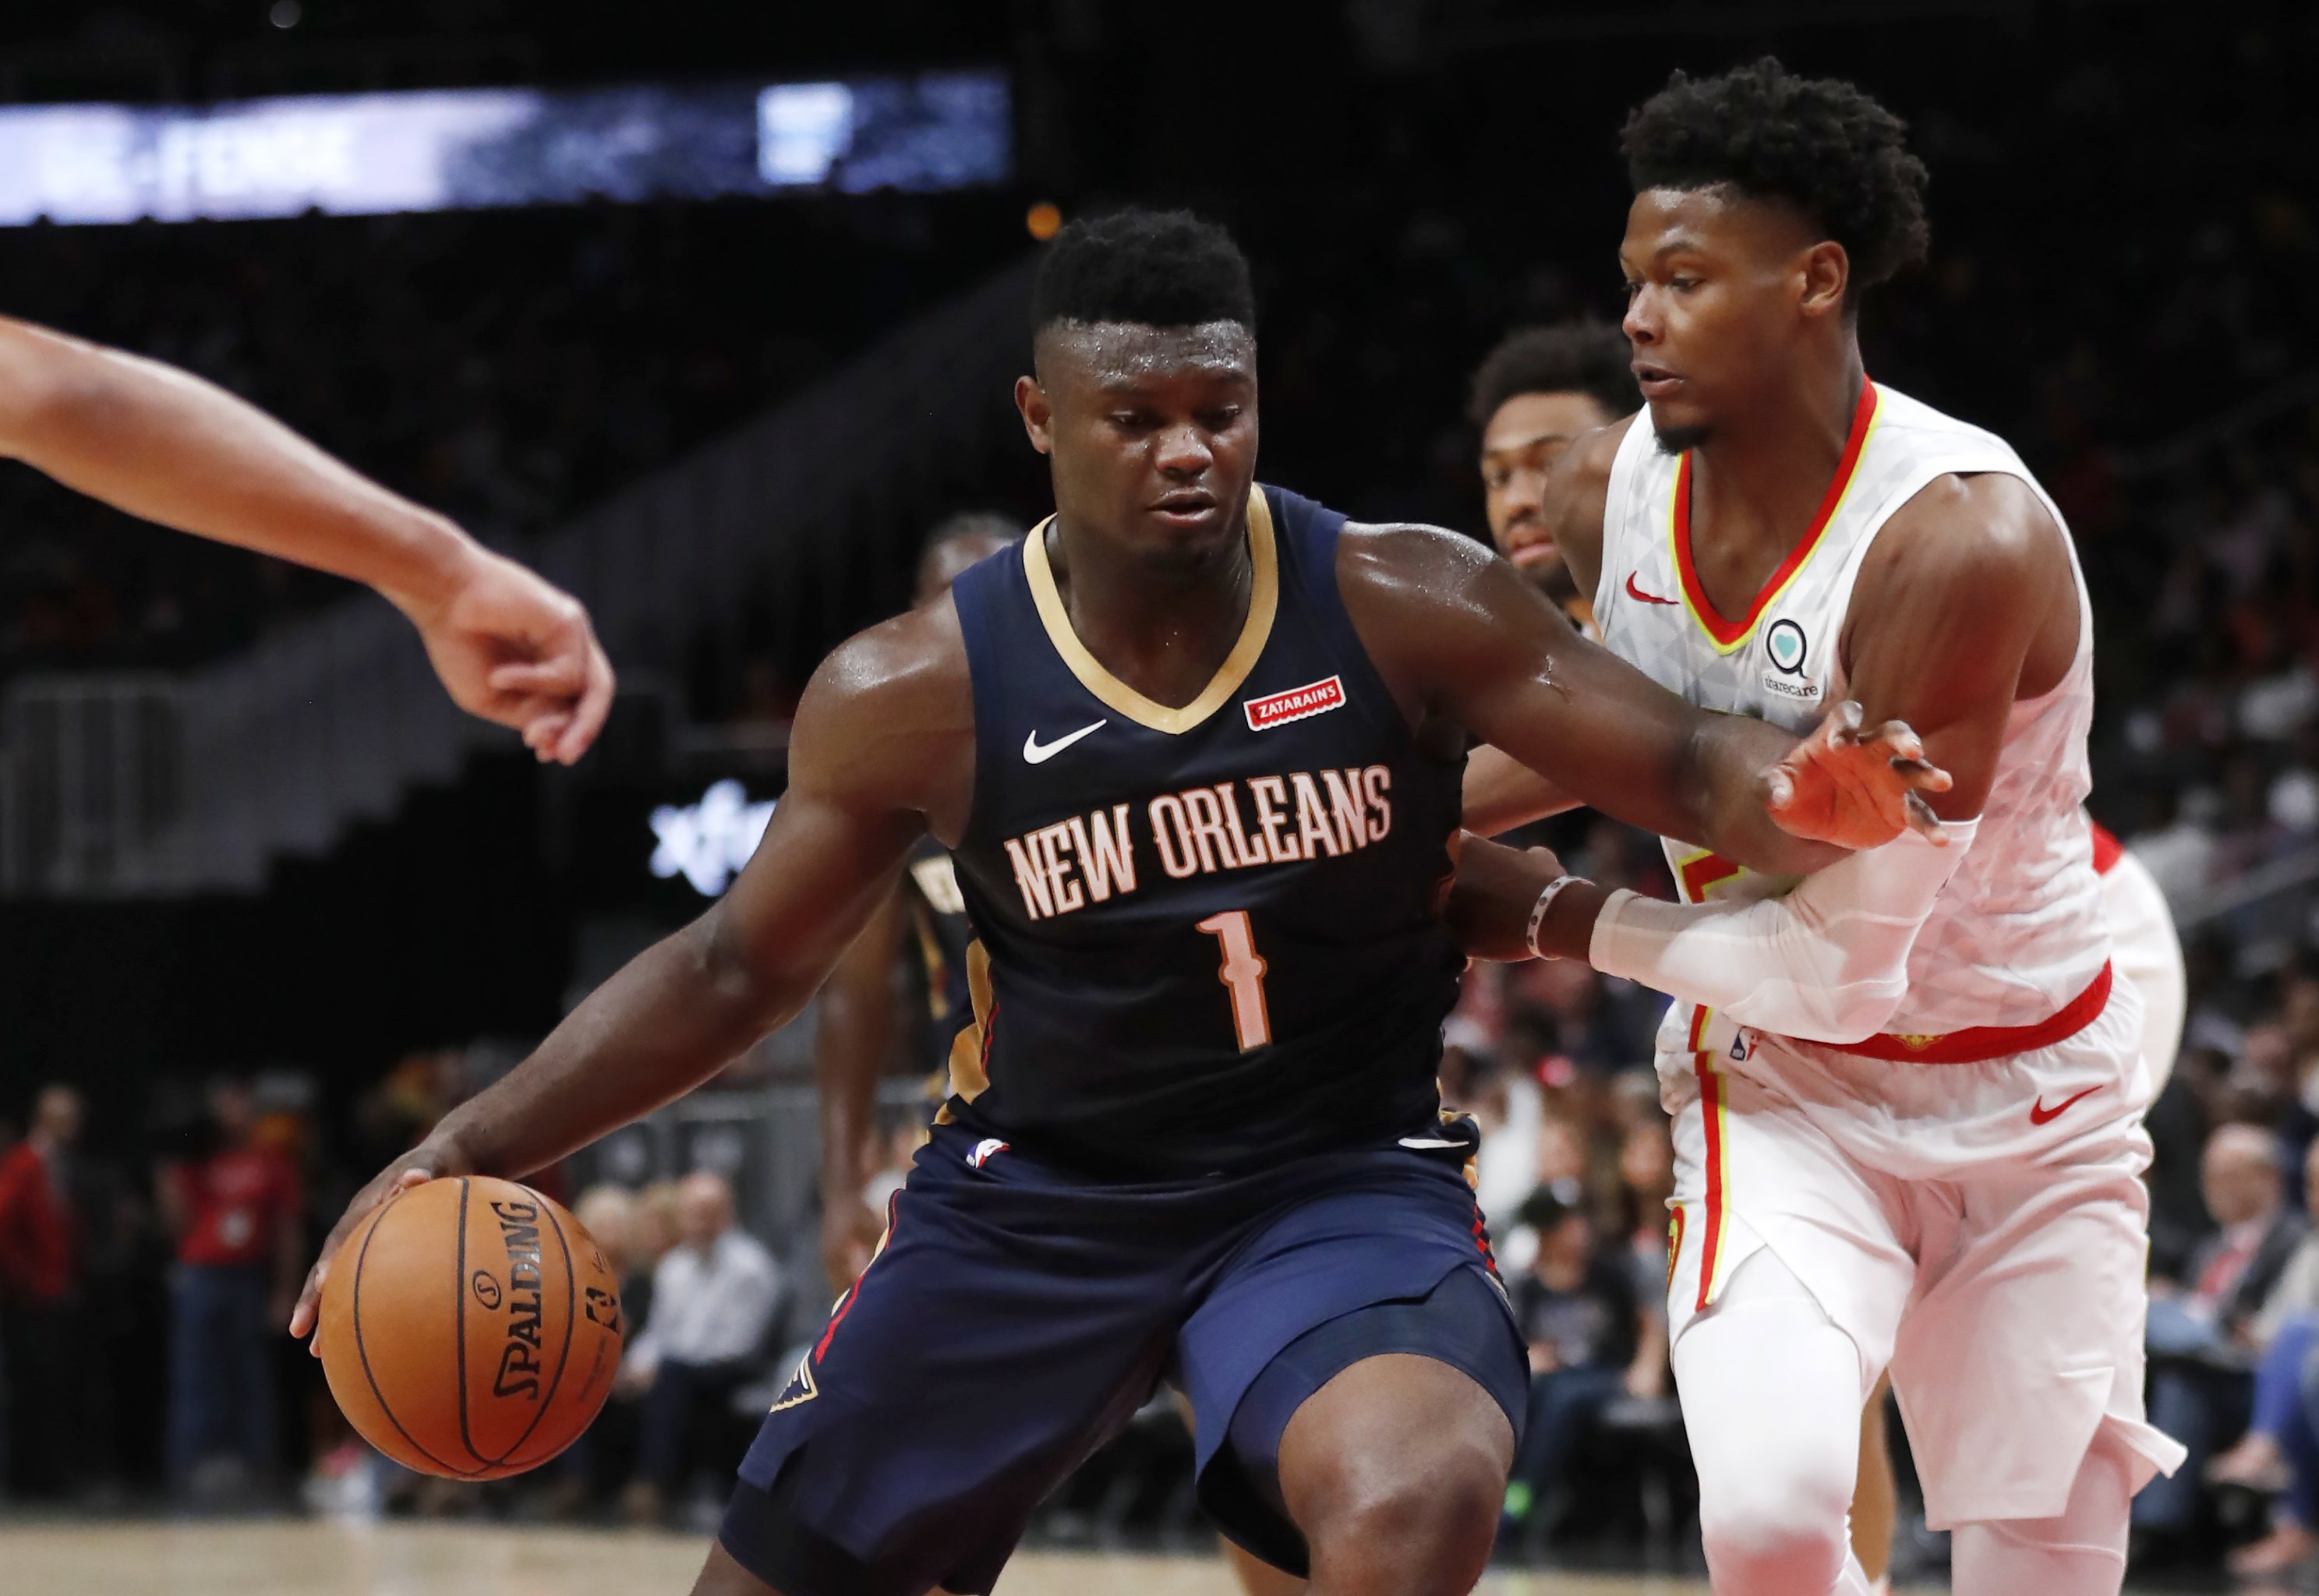 How Pelicans' Zion Williamson, Knicks' RJ Barrett are obliterating records  even before first NBA game 